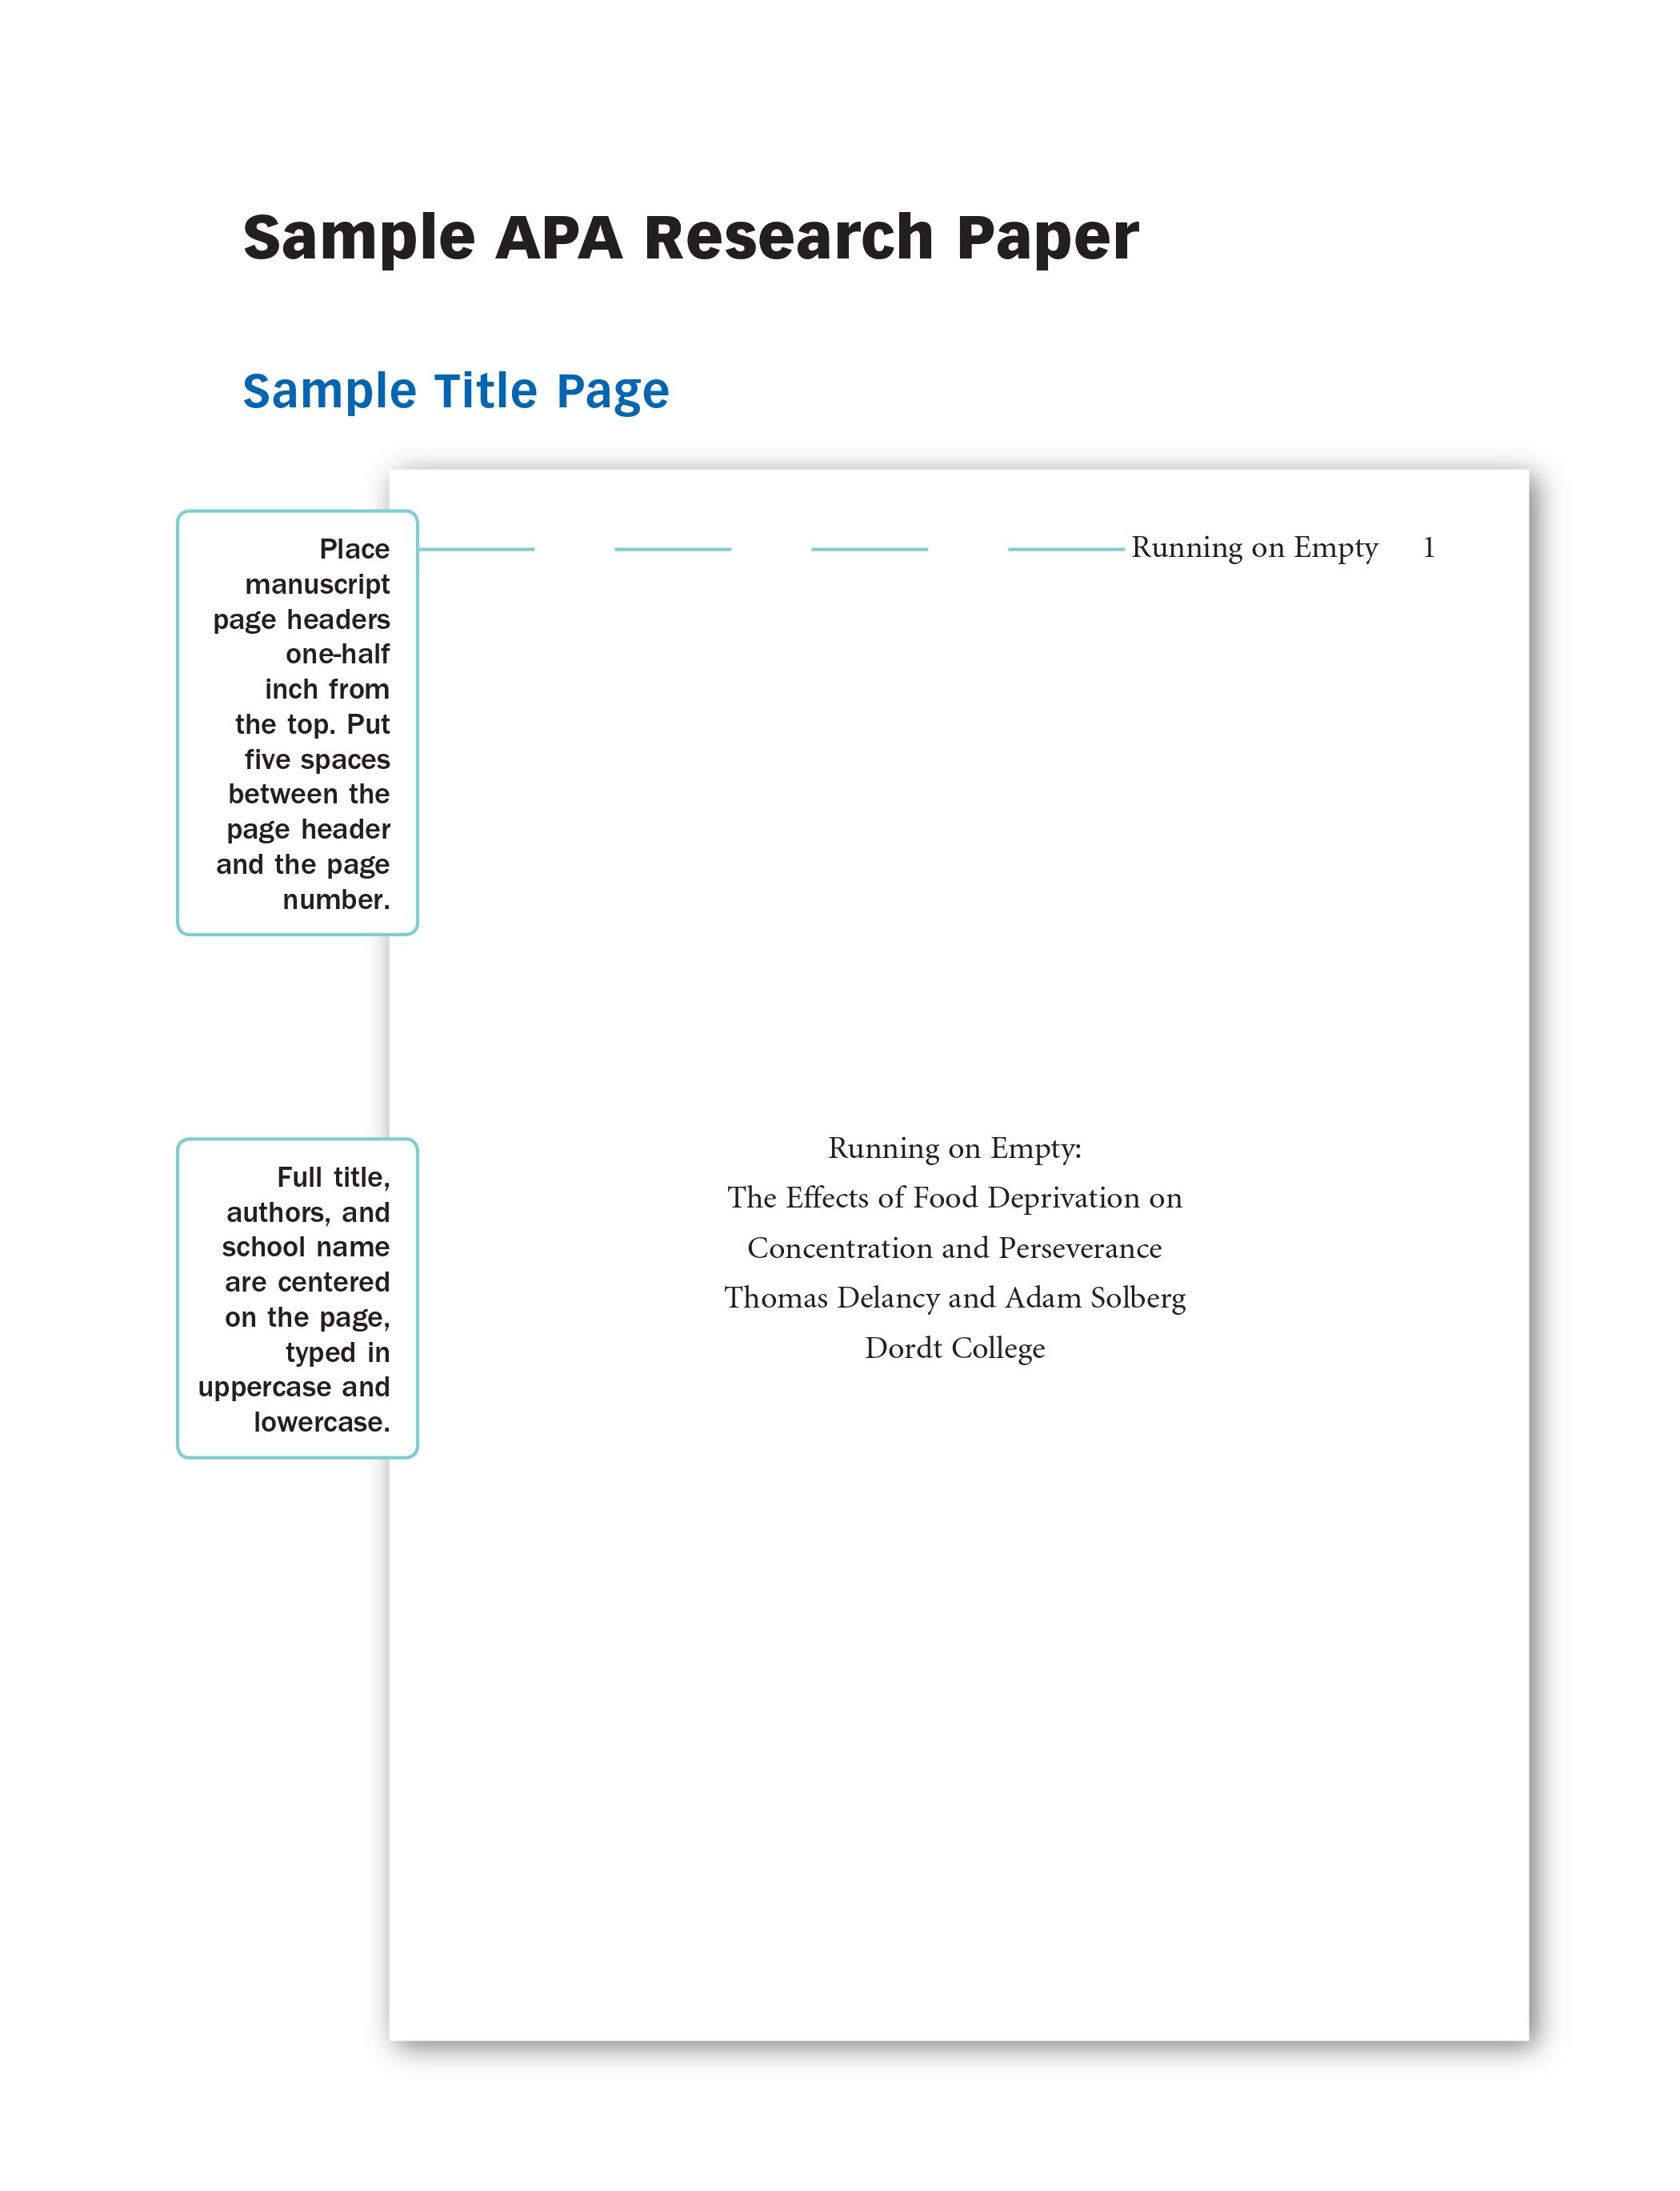 apa format for title page of research paper